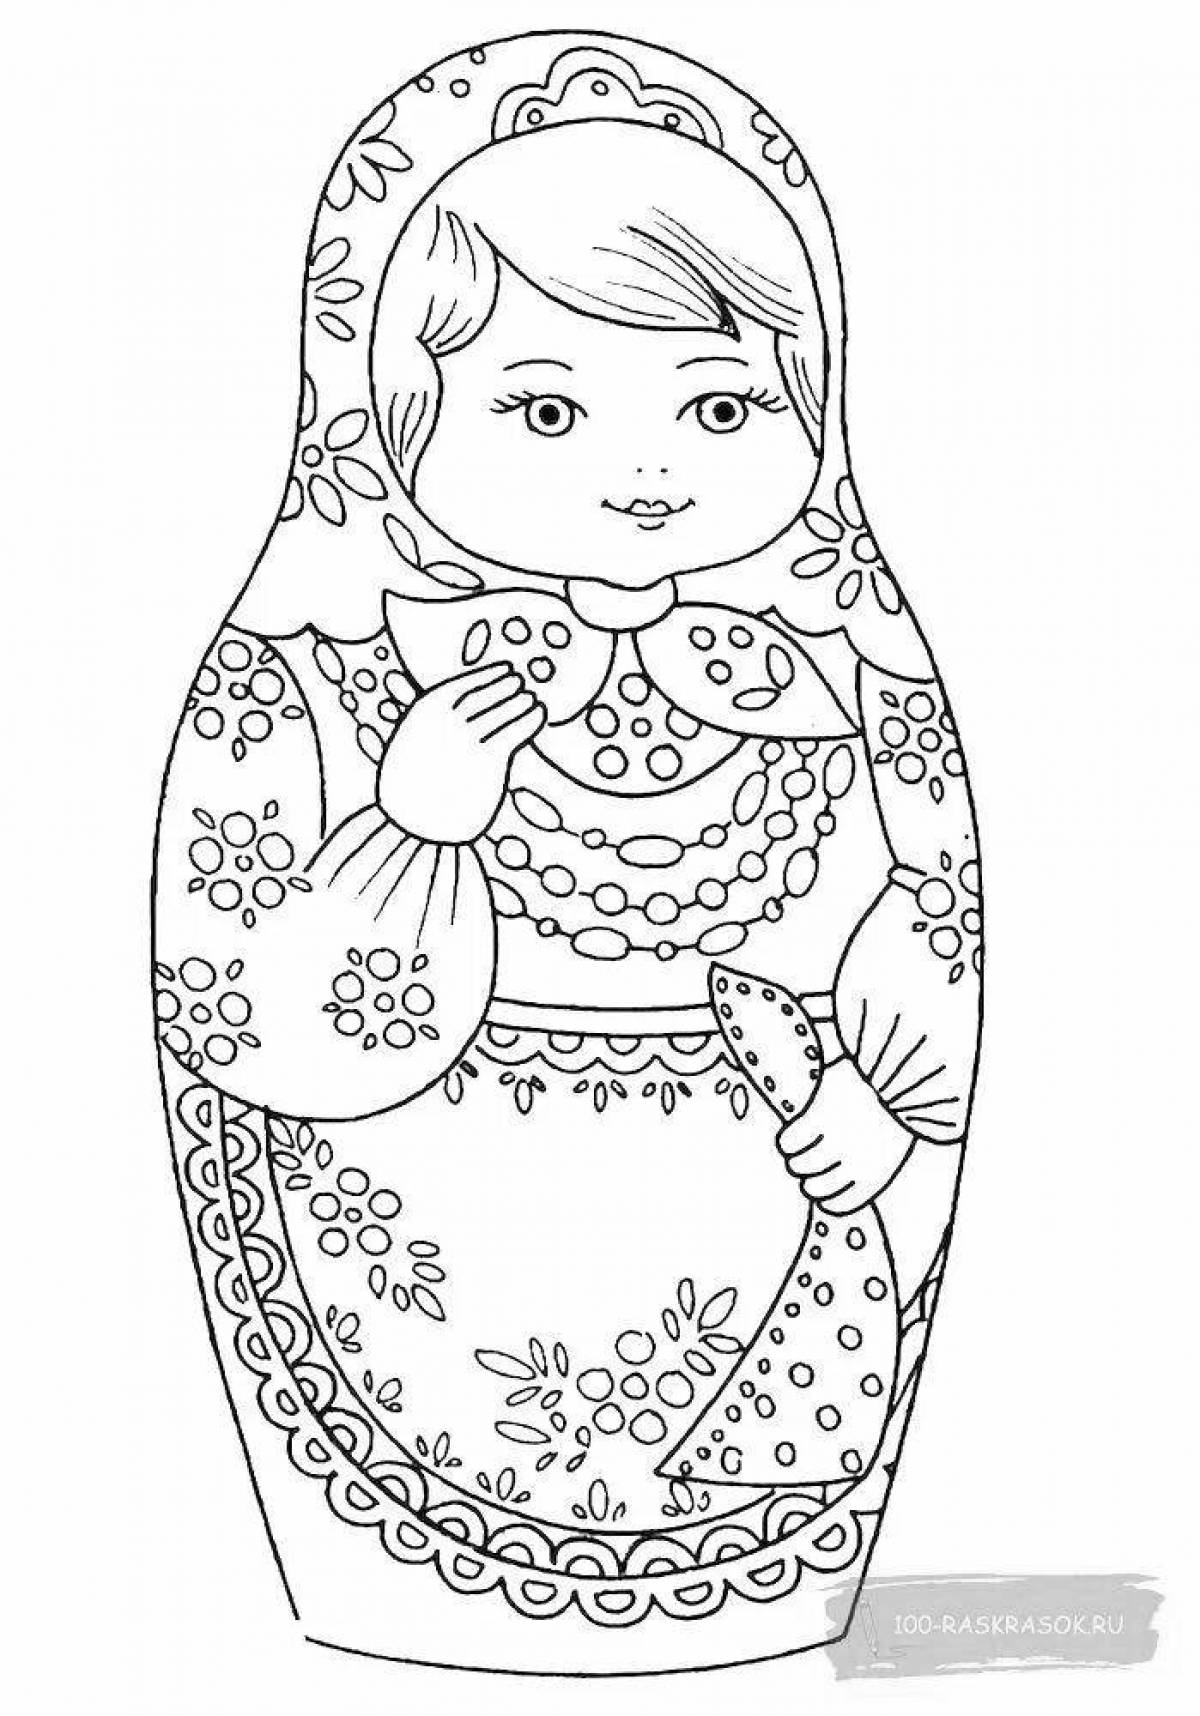 Fancy matryoshka picture for kids